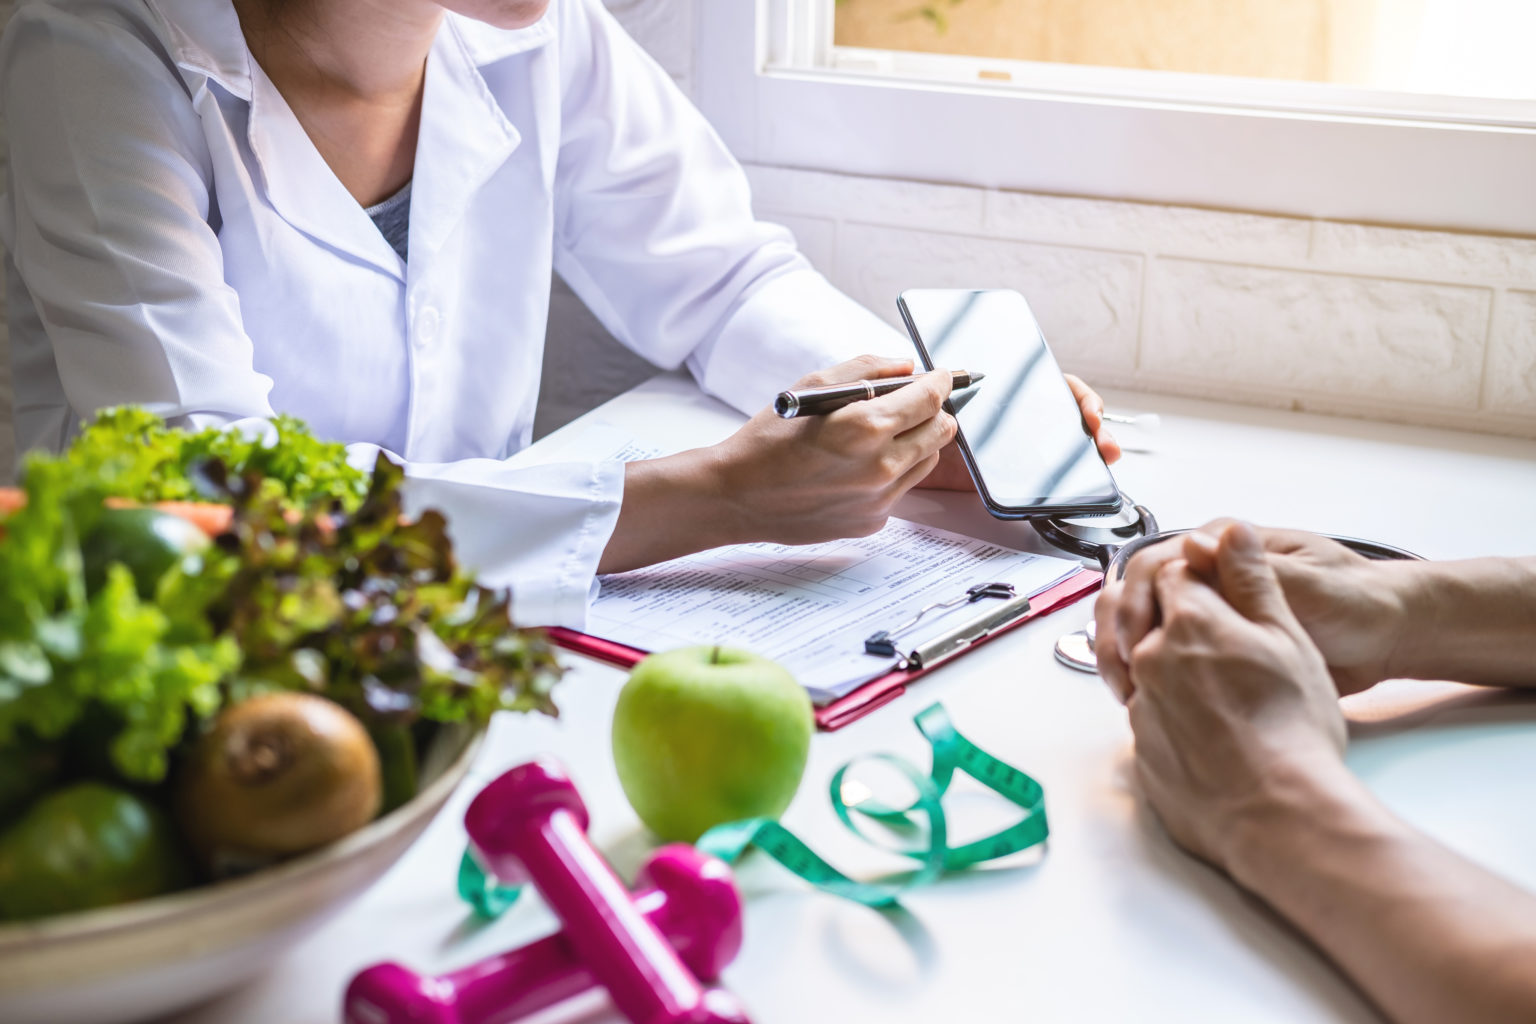 What is the Best Way to a Dietitian or Nutritionist?